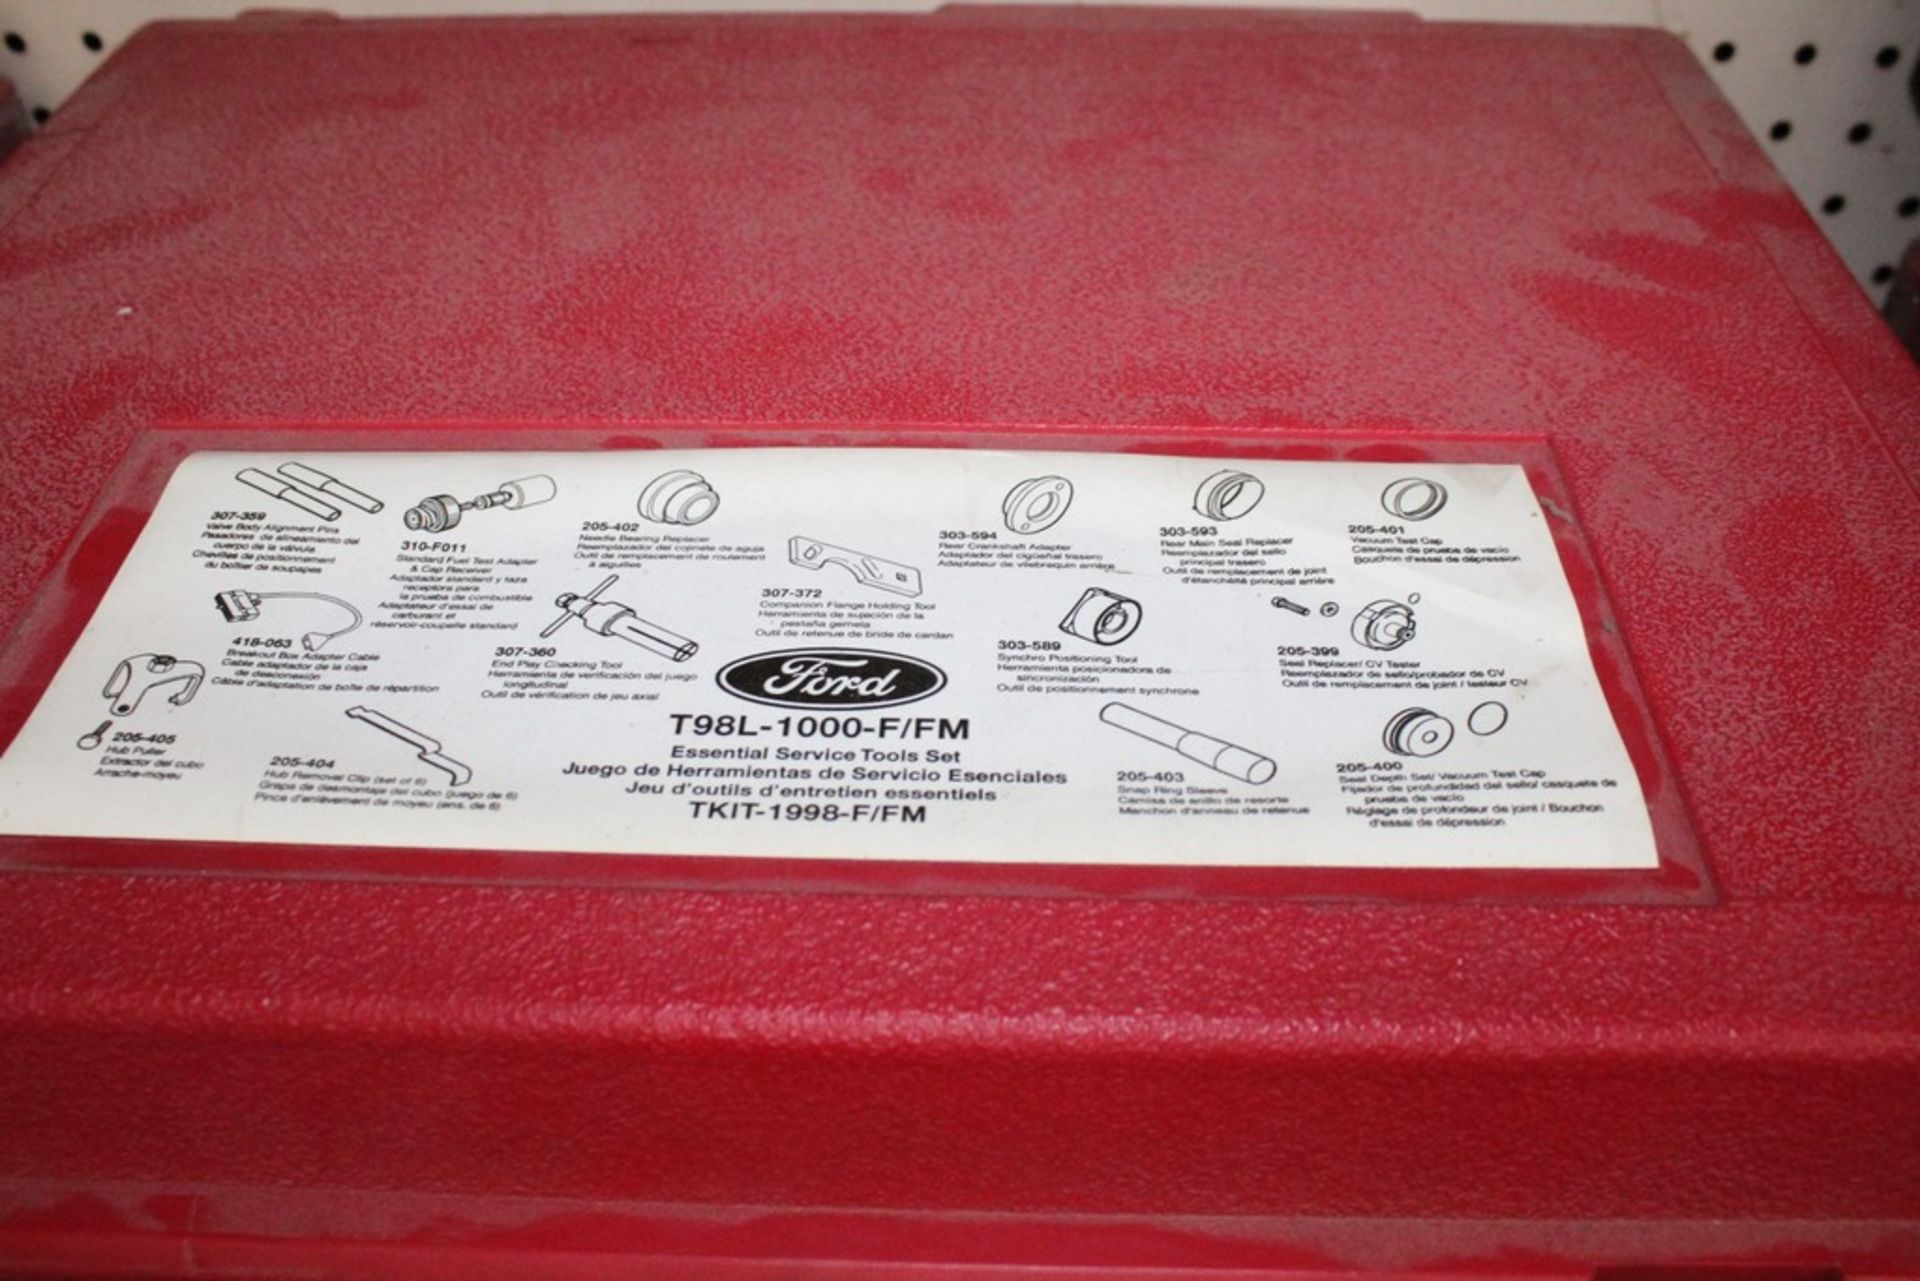 ASSORTED 1998 FORD ROTUNDA ESSENTIAL SERVICE TOOL SETS IN TWO CASES - Image 4 of 5